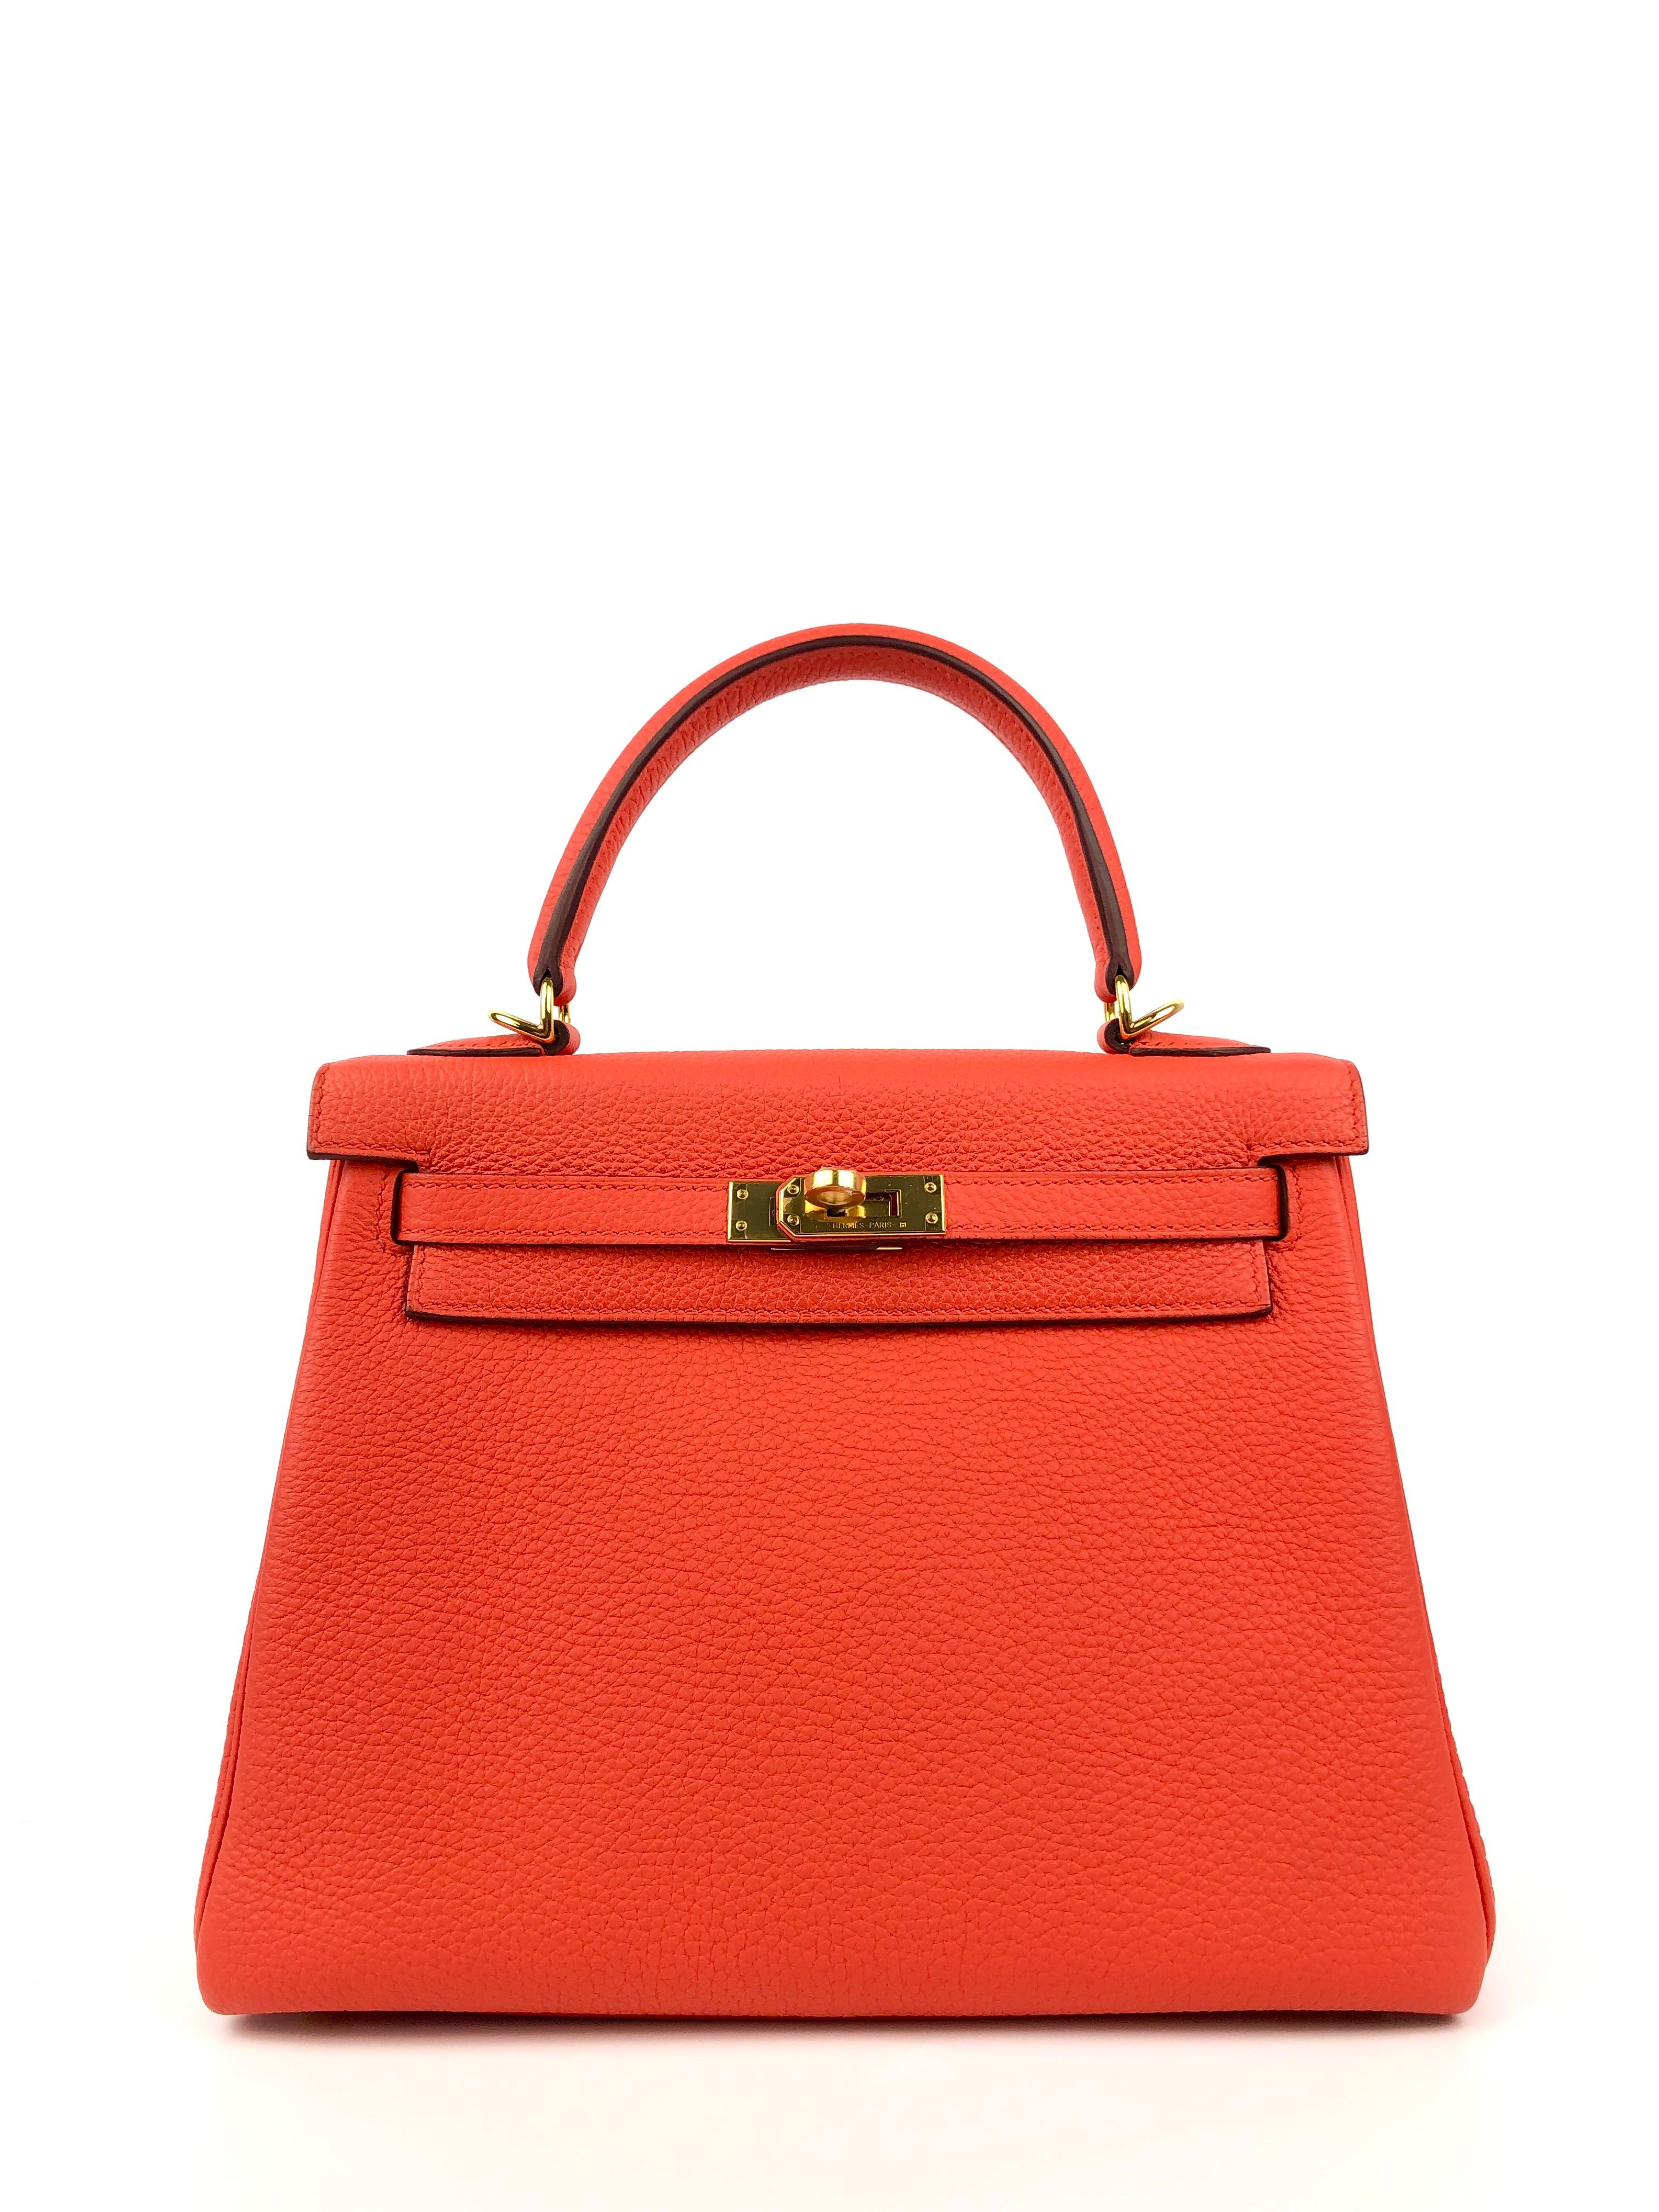 Hermes Kelly 25 Capucine Orange Red Gold Hardware. 2017 A STAMP. Pristine Condition, Plastic on Hardware perfect corners and structure. 

Shop with confidence from Lux Addicts. Authenticity Guaranteed!